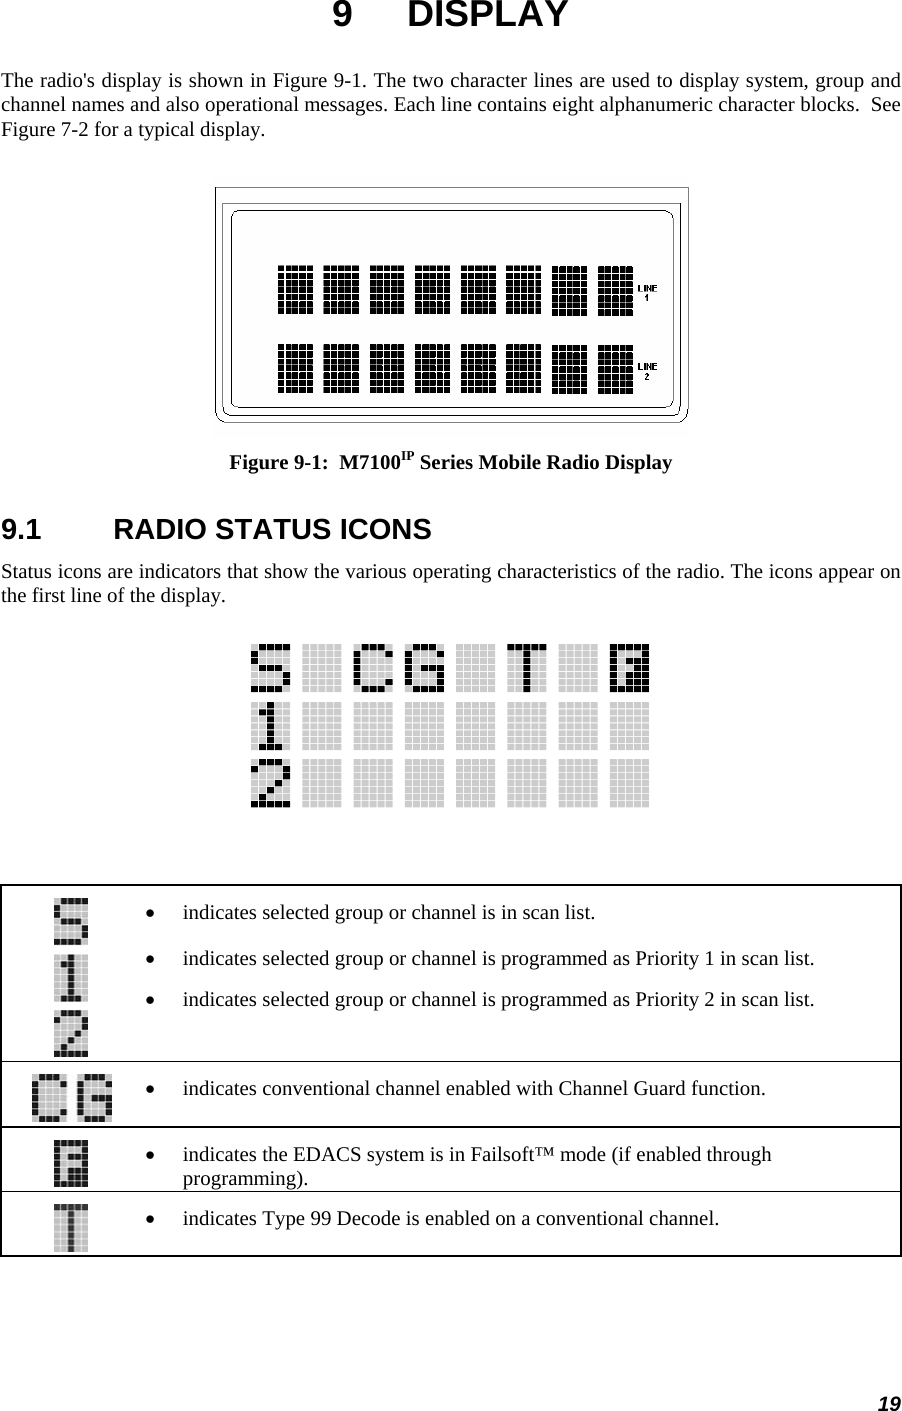 19 9 DISPLAY The radio&apos;s display is shown in Figure 9-1. The two character lines are used to display system, group and channel names and also operational messages. Each line contains eight alphanumeric character blocks.  See Figure 7-2 for a typical display.   Figure 9-1:  M7100IP Series Mobile Radio Display 9.1  RADIO STATUS ICONS Status icons are indicators that show the various operating characteristics of the radio. The icons appear on the first line of the display.     • indicates selected group or channel is in scan list. • indicates selected group or channel is programmed as Priority 1 in scan list. • indicates selected group or channel is programmed as Priority 2 in scan list.   • indicates conventional channel enabled with Channel Guard function.   • indicates the EDACS system is in Failsoft™ mode (if enabled through programming).   • indicates Type 99 Decode is enabled on a conventional channel.  